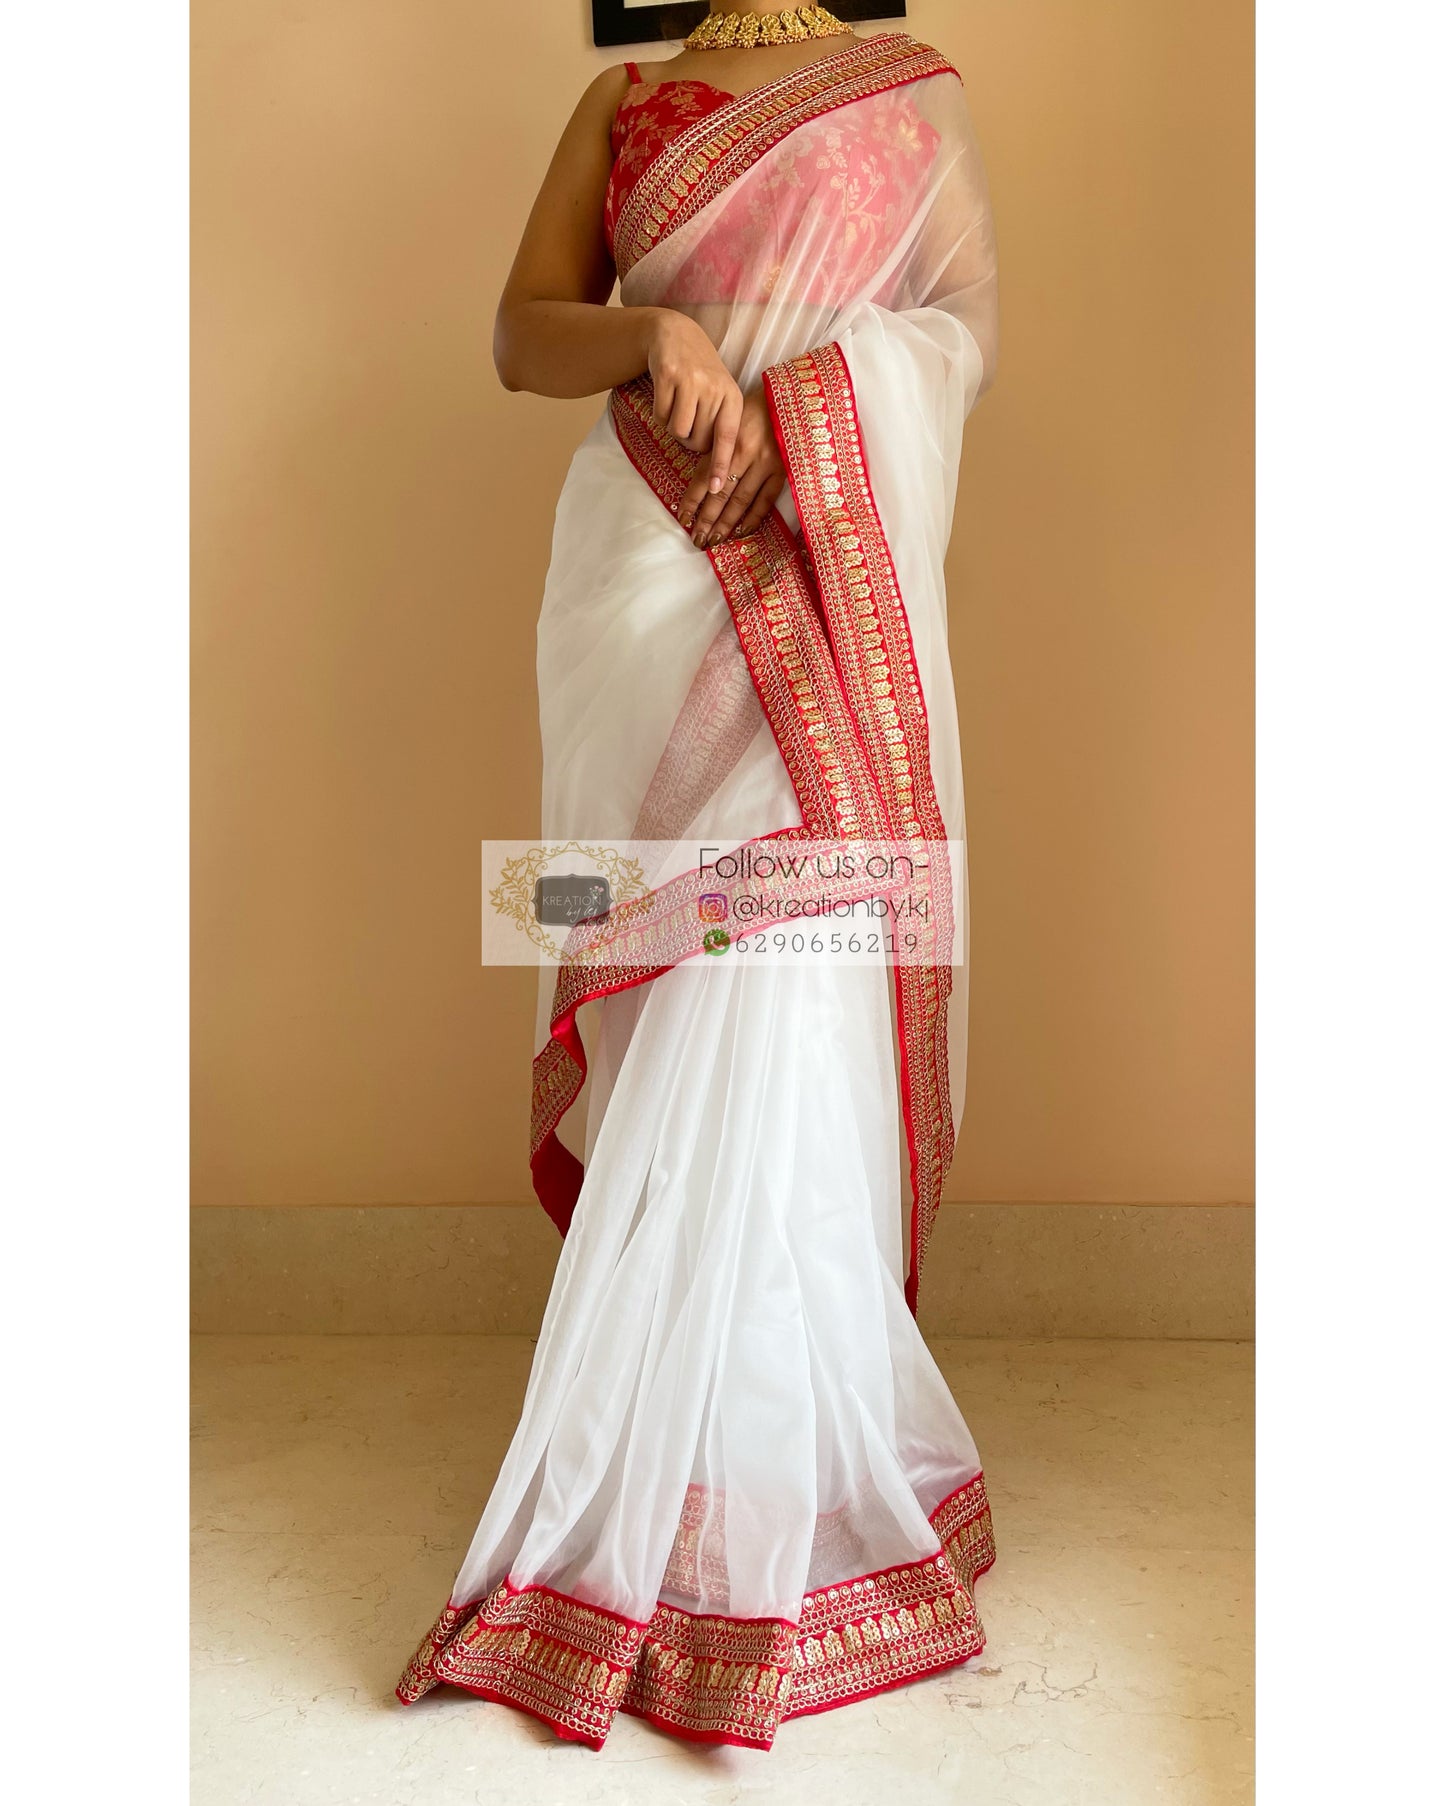 White Organza Saree with Red Border - kreationbykj